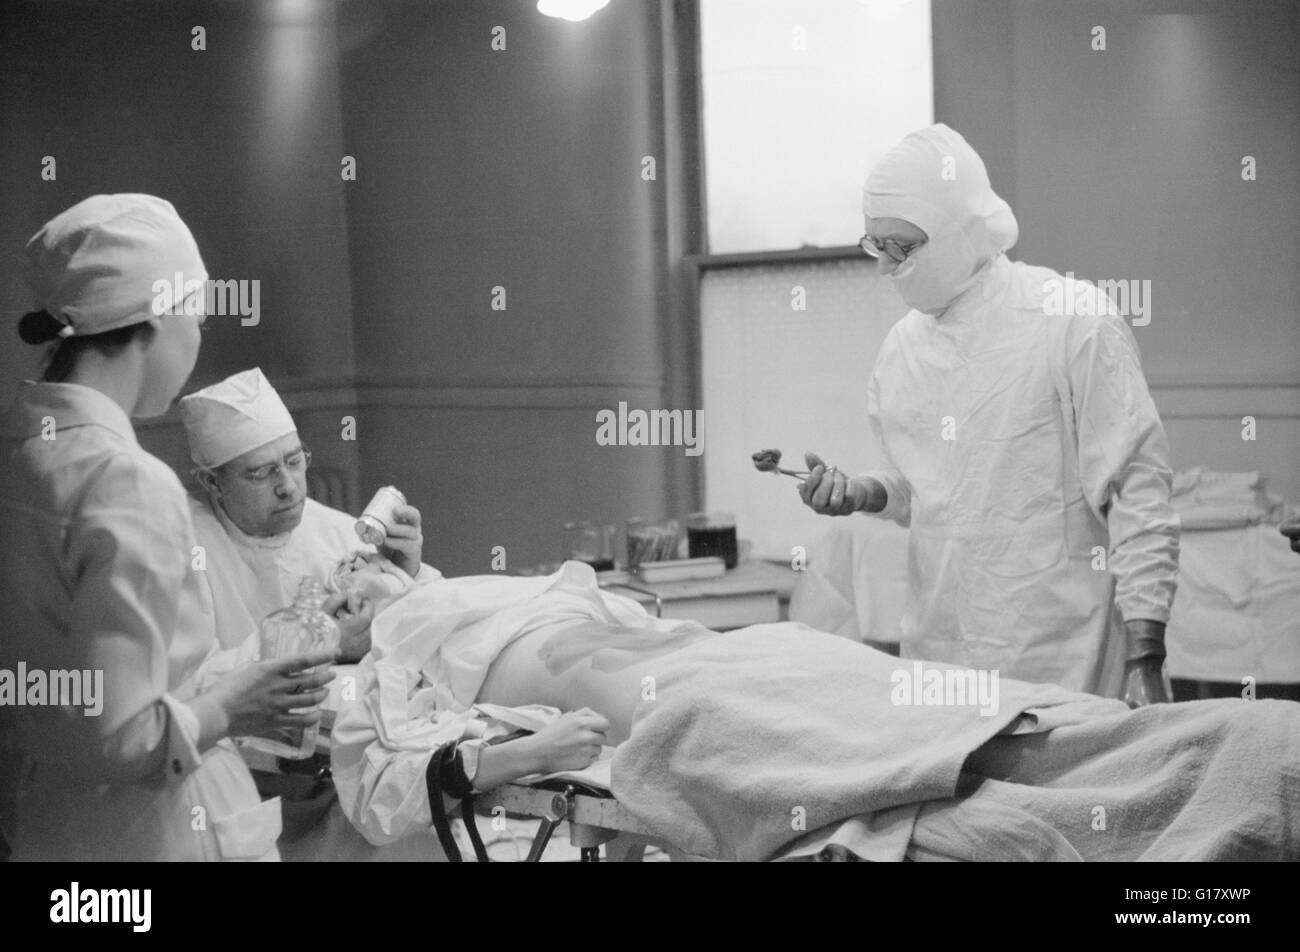 Patient Being Prepared for Operation, Herring Hospital, Herrin, Illinois, USA, Arthur Rothstein for Farm Security Administration, January 1939 Stock Photo